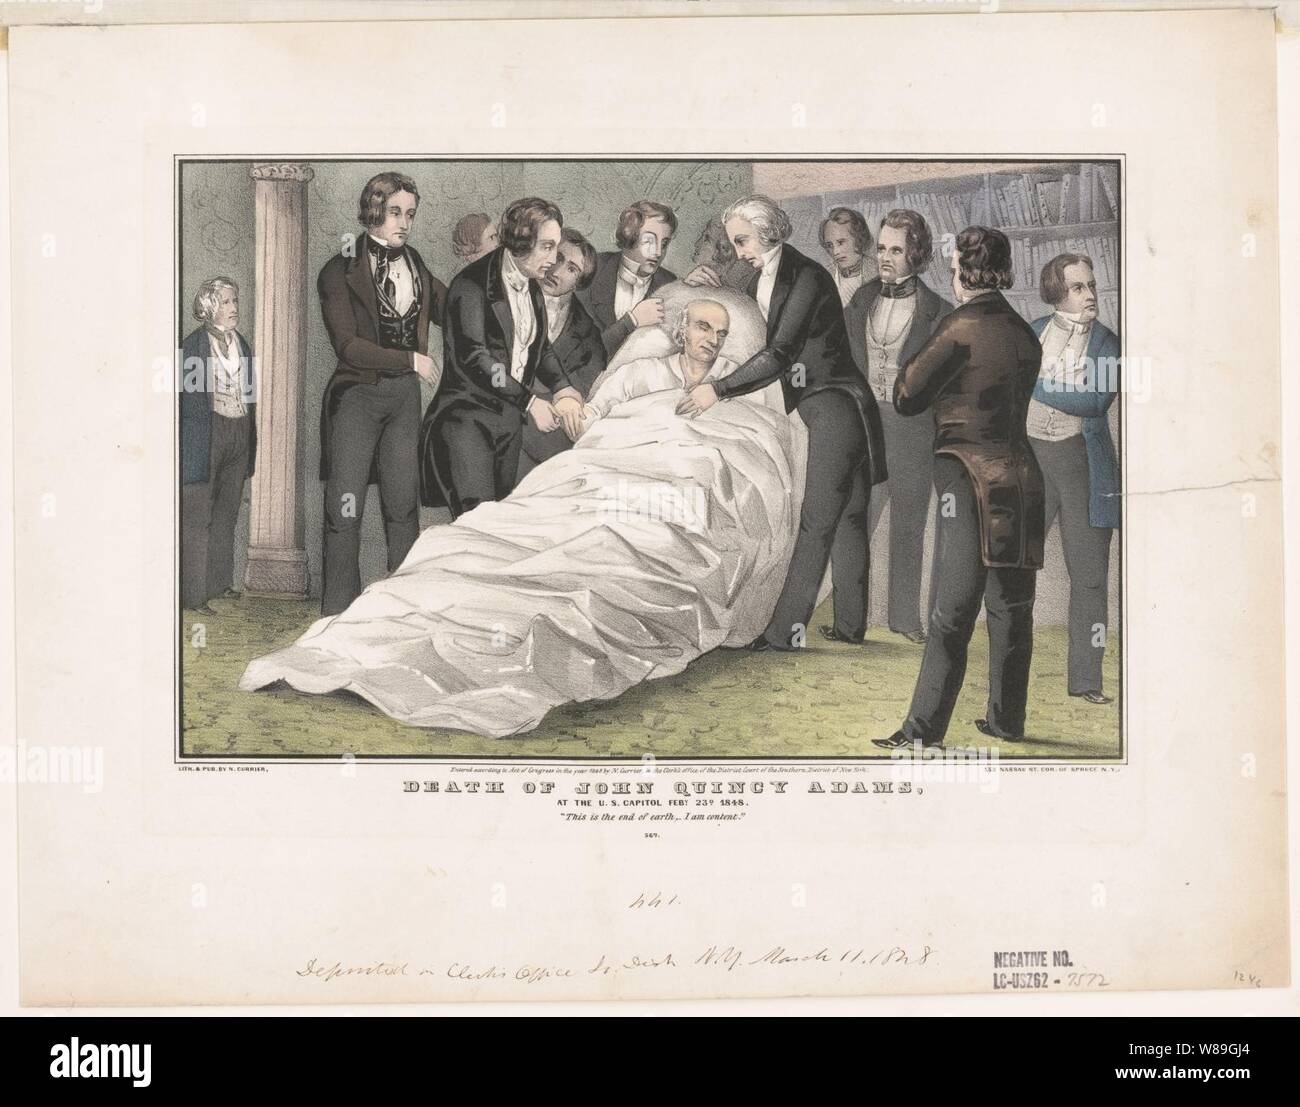 Death of John Quincy Adams at the U.S. Capitol Feby. 23d 1848 Stock Photo